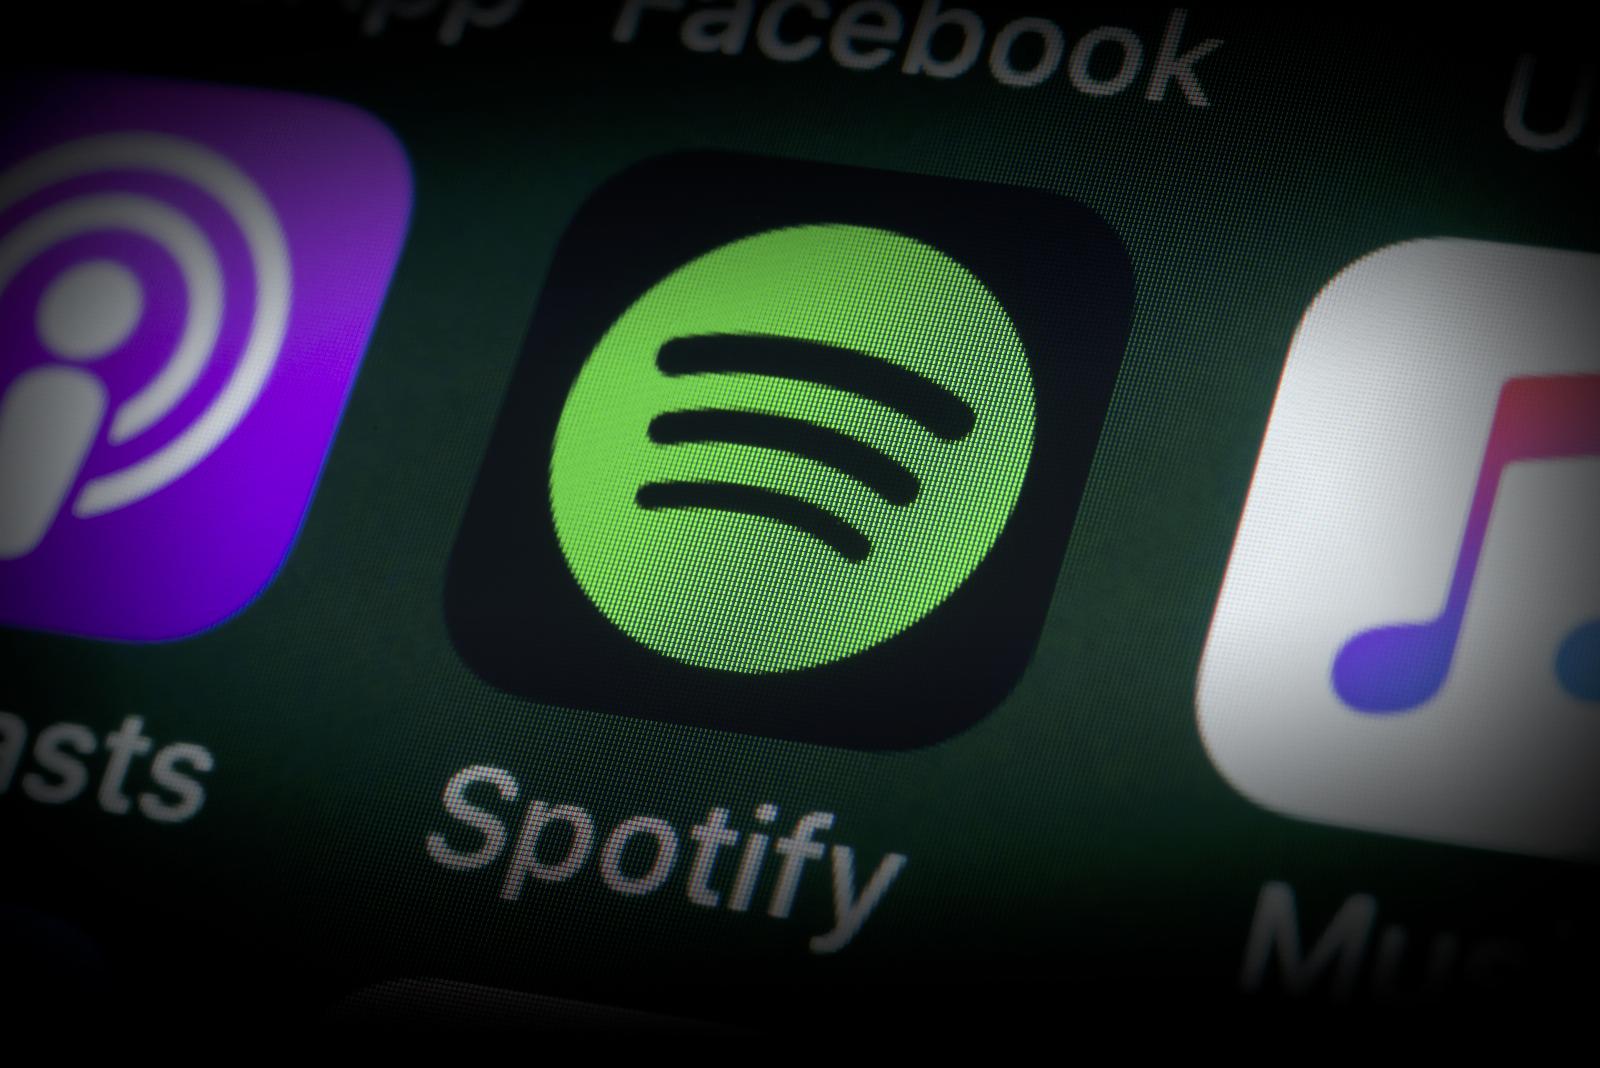 Spotify is shutting down its live audio app Spotify Live